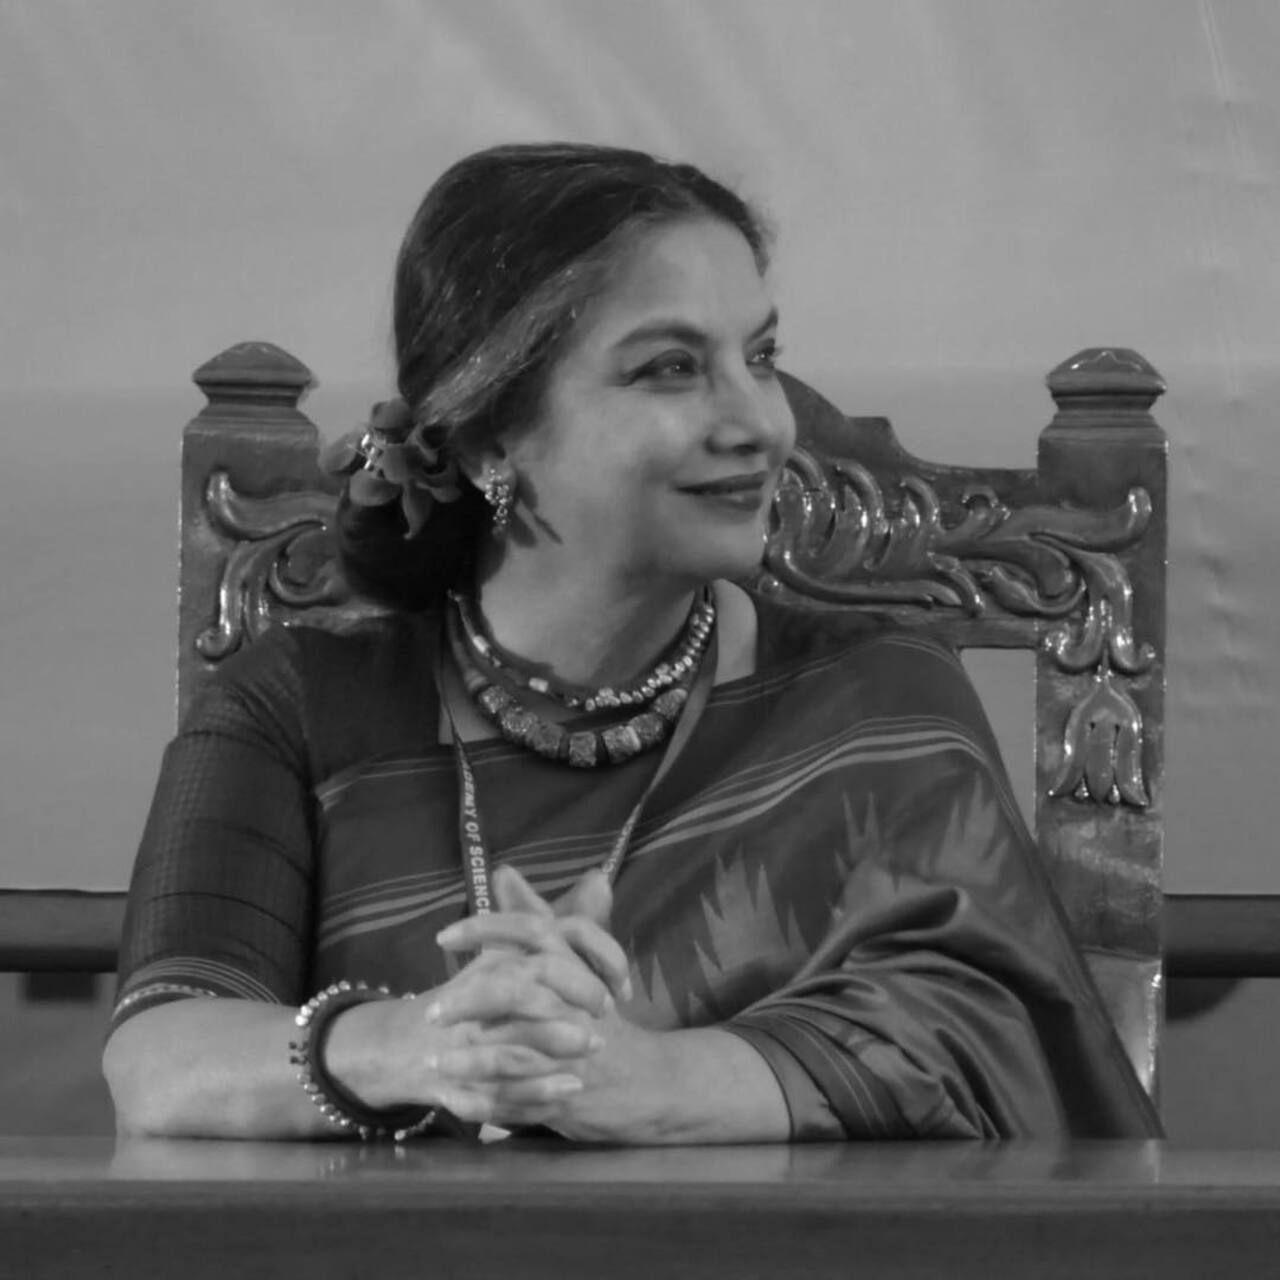 Shabana Azmi's talent and dedication to her craft have earned her recognition on the international stage